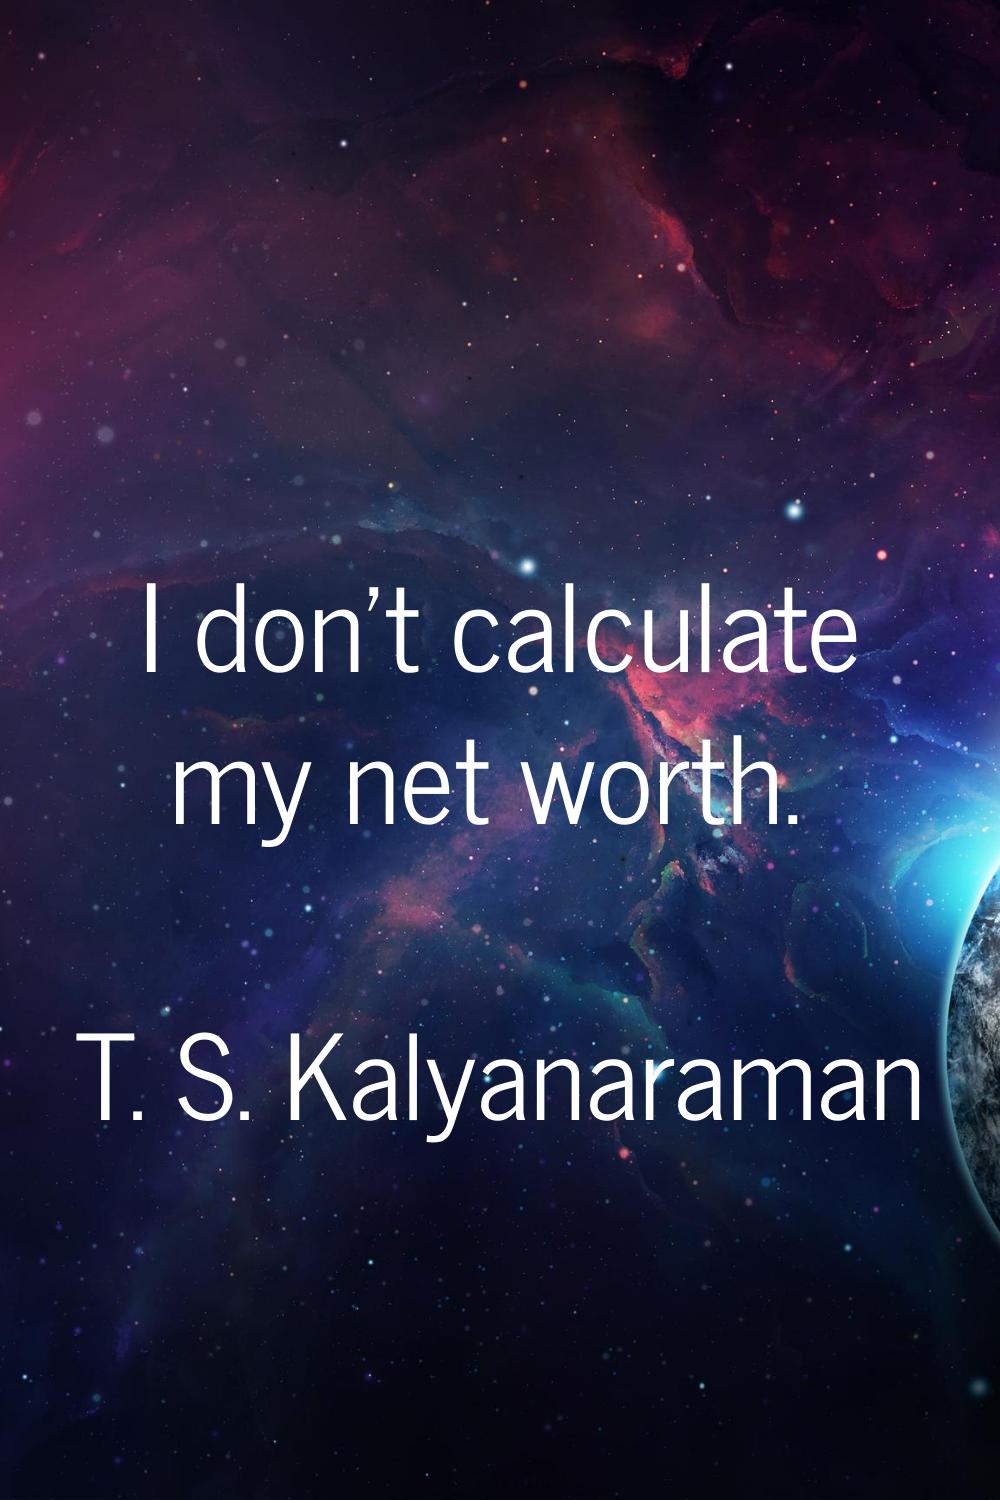 I don't calculate my net worth.